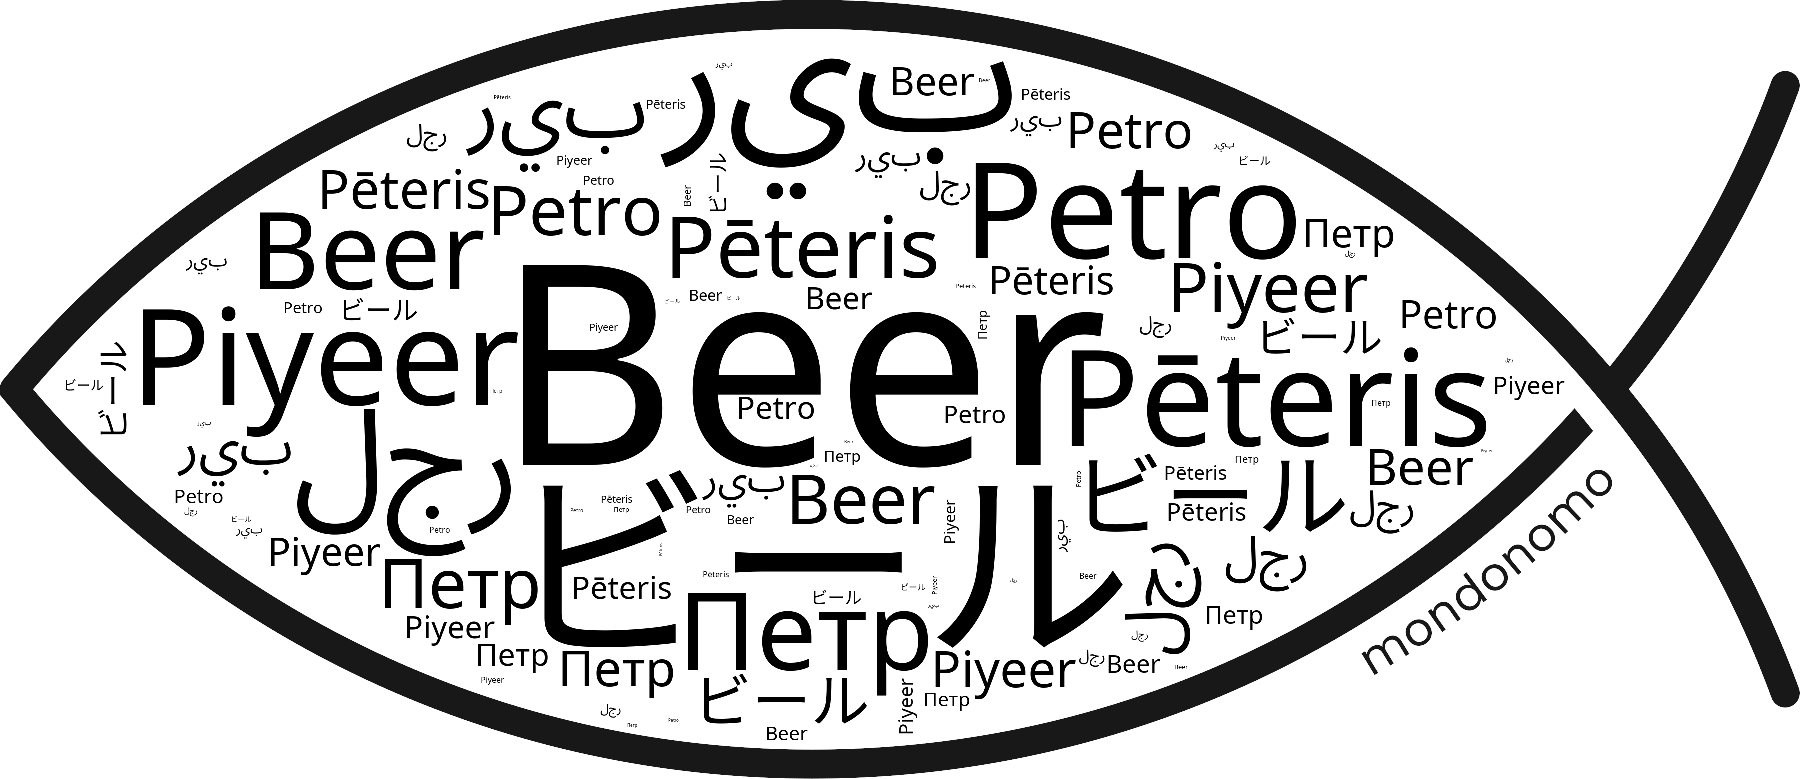 Name Beer in the world's Bibles